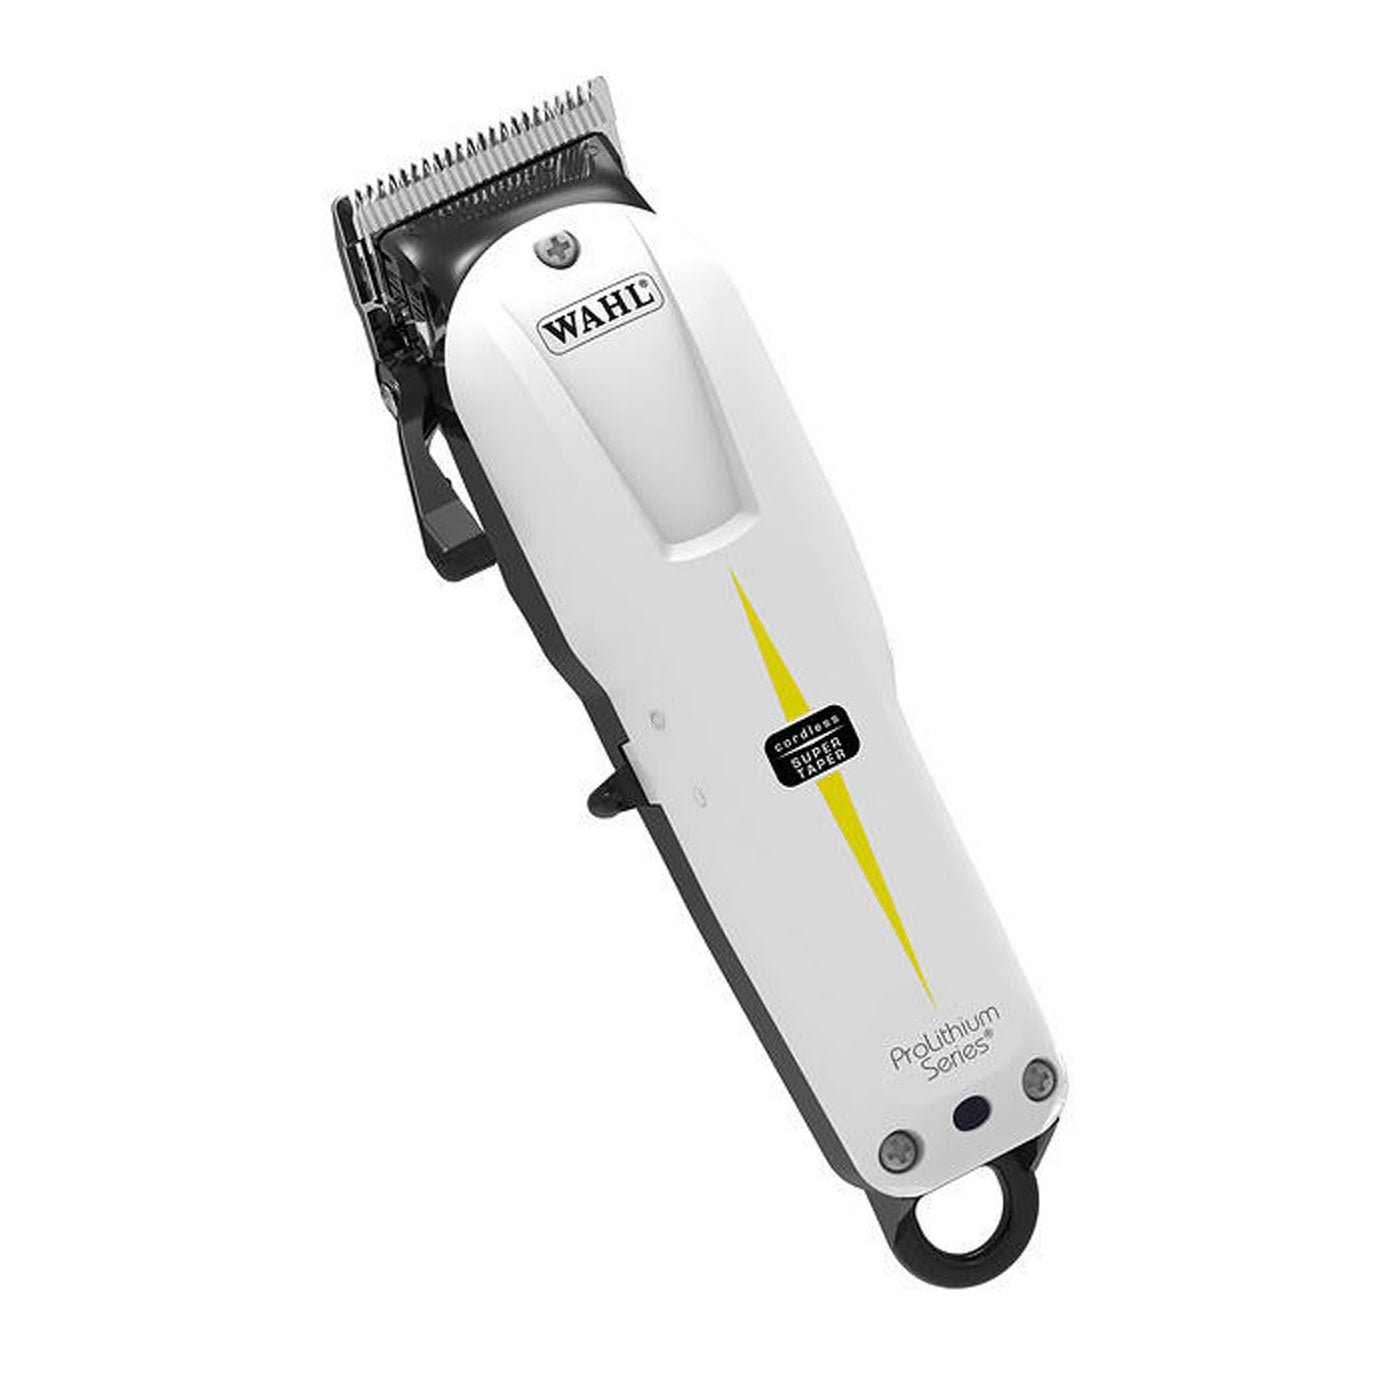 hair clippers cordless wahl